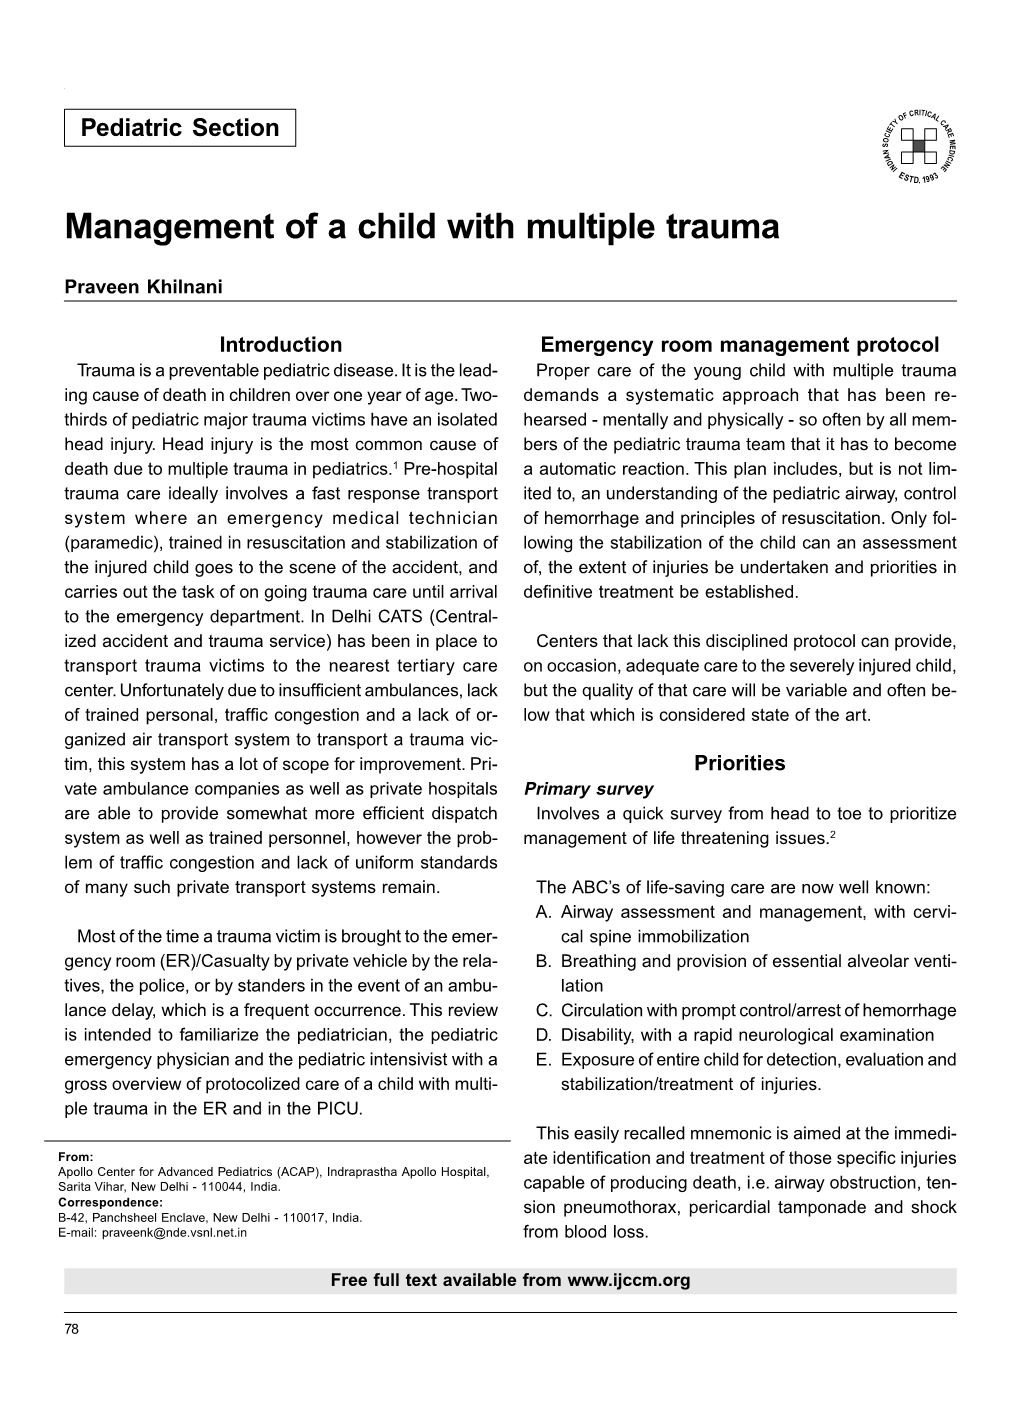 Management of a Child with Multiple Trauma